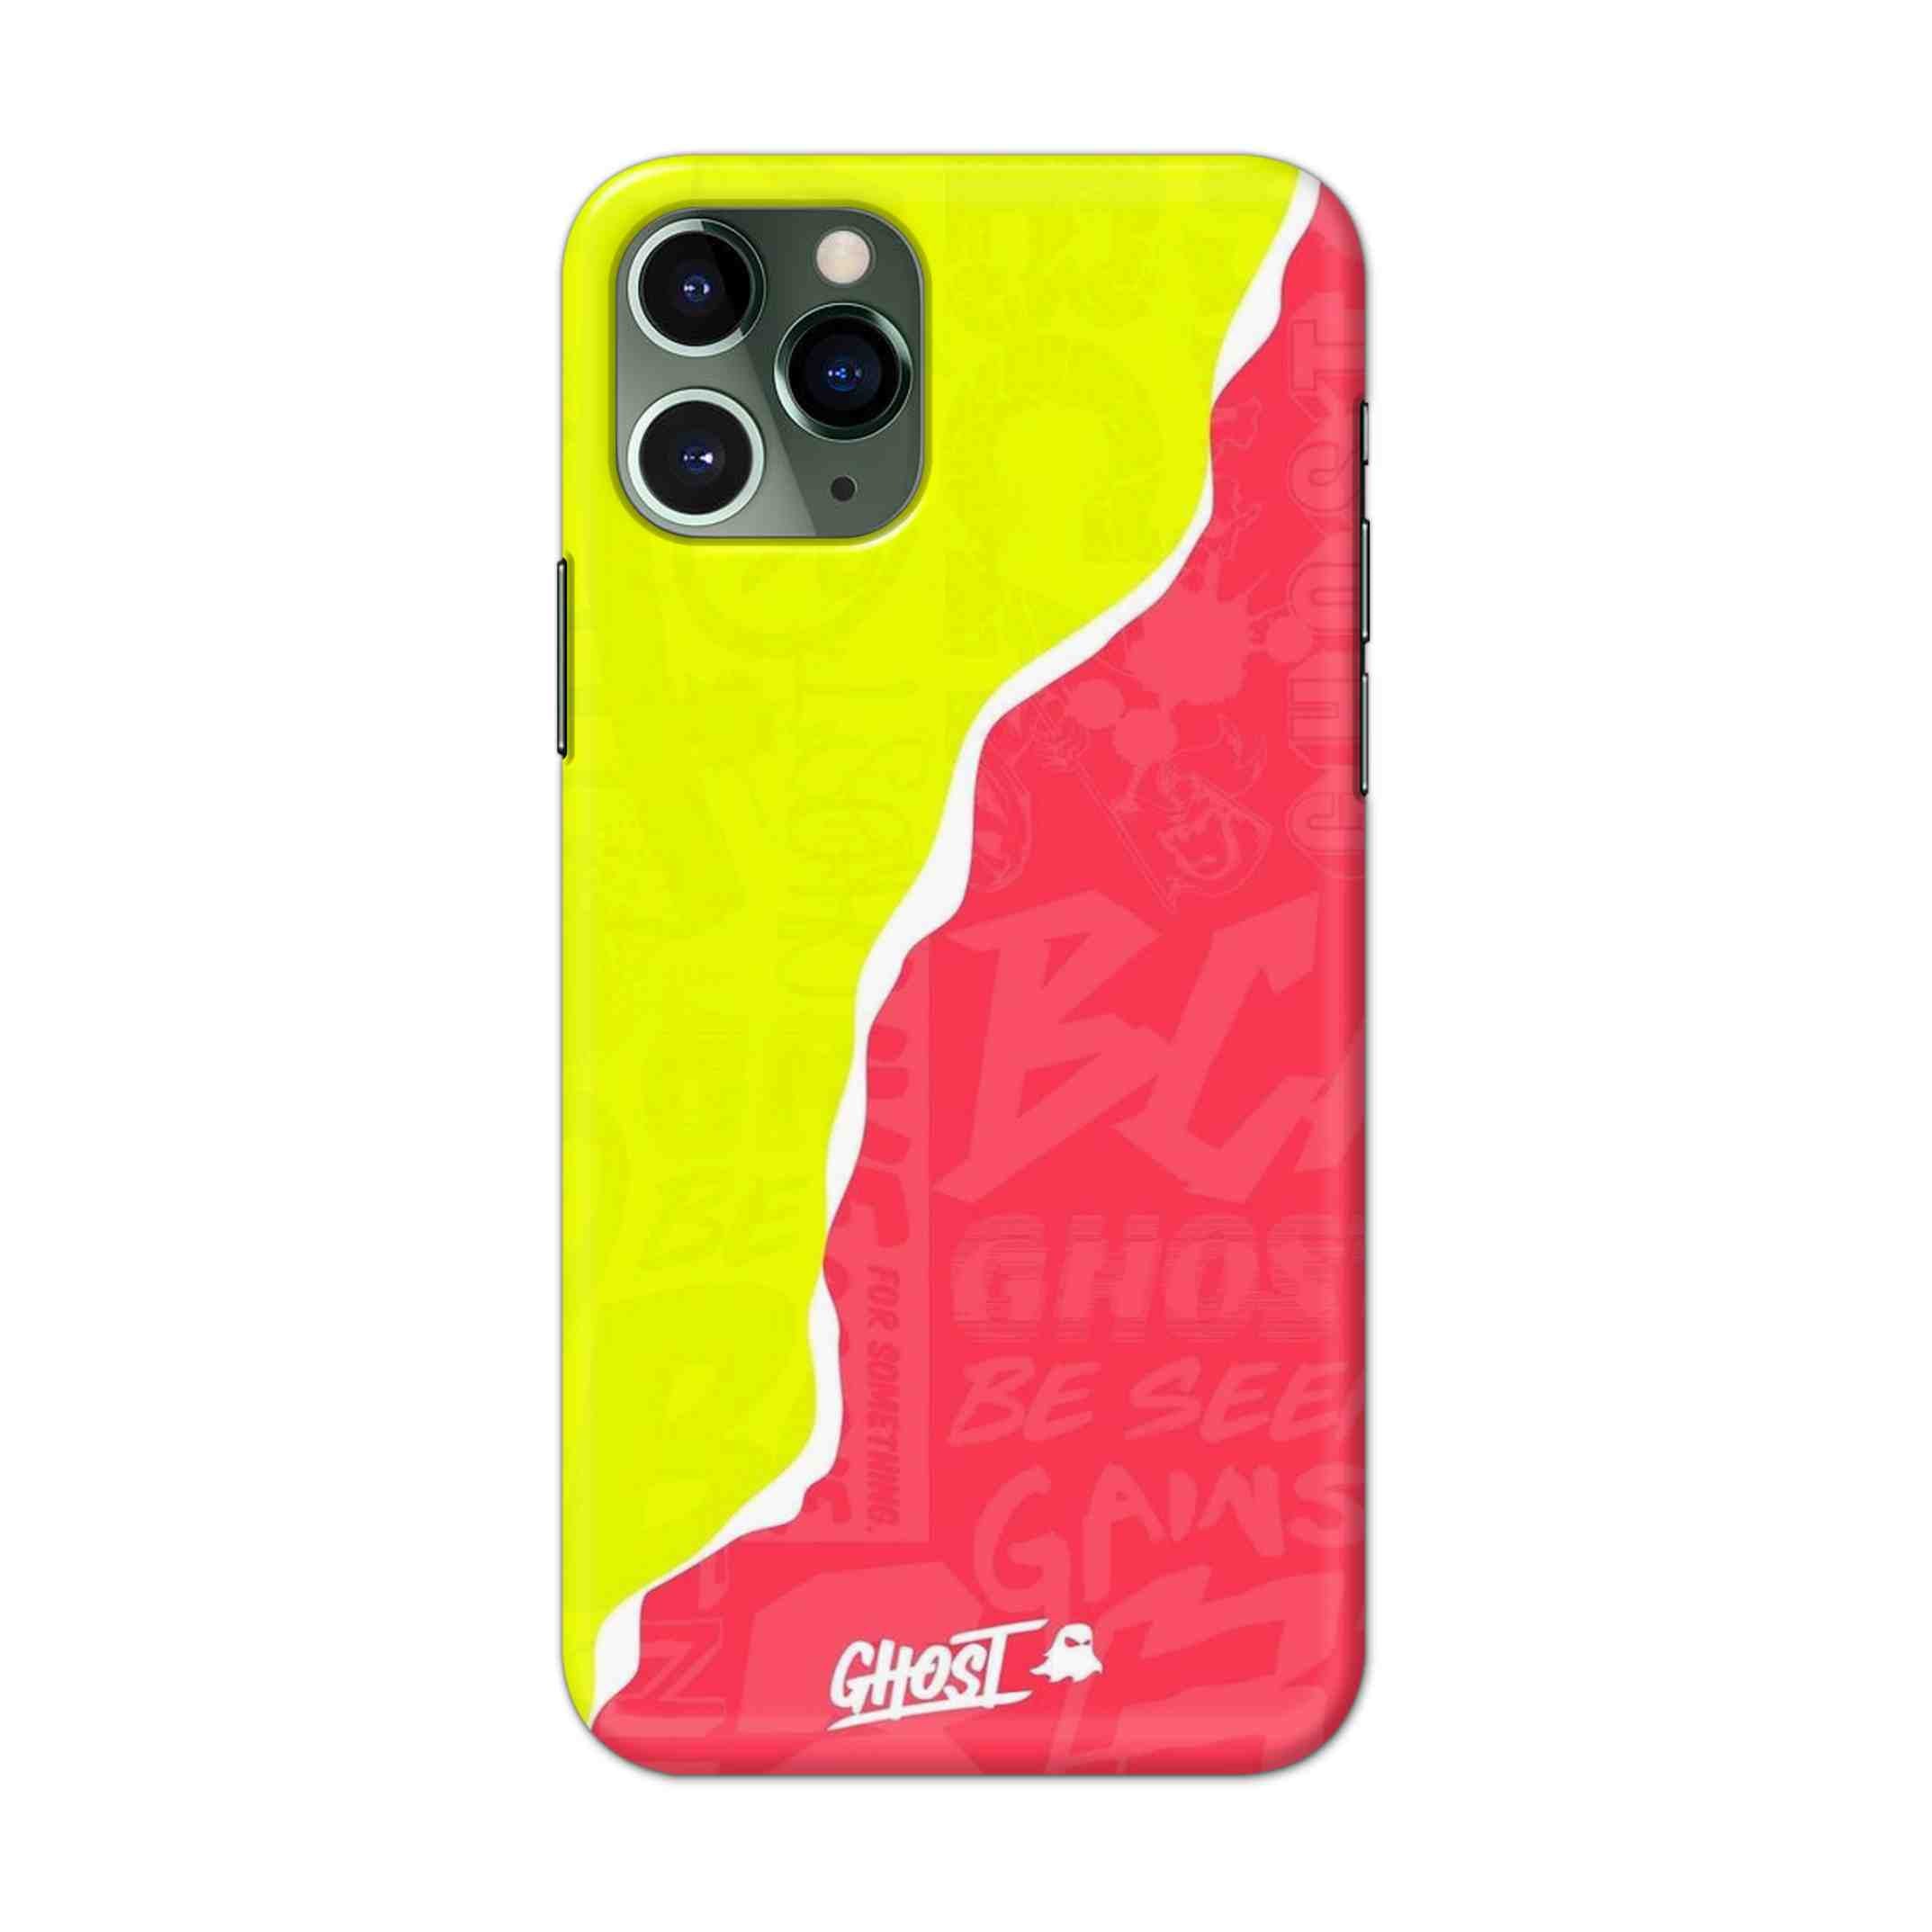 Buy Ghost Hard Back Mobile Phone Case/Cover For iPhone 11 Pro Online